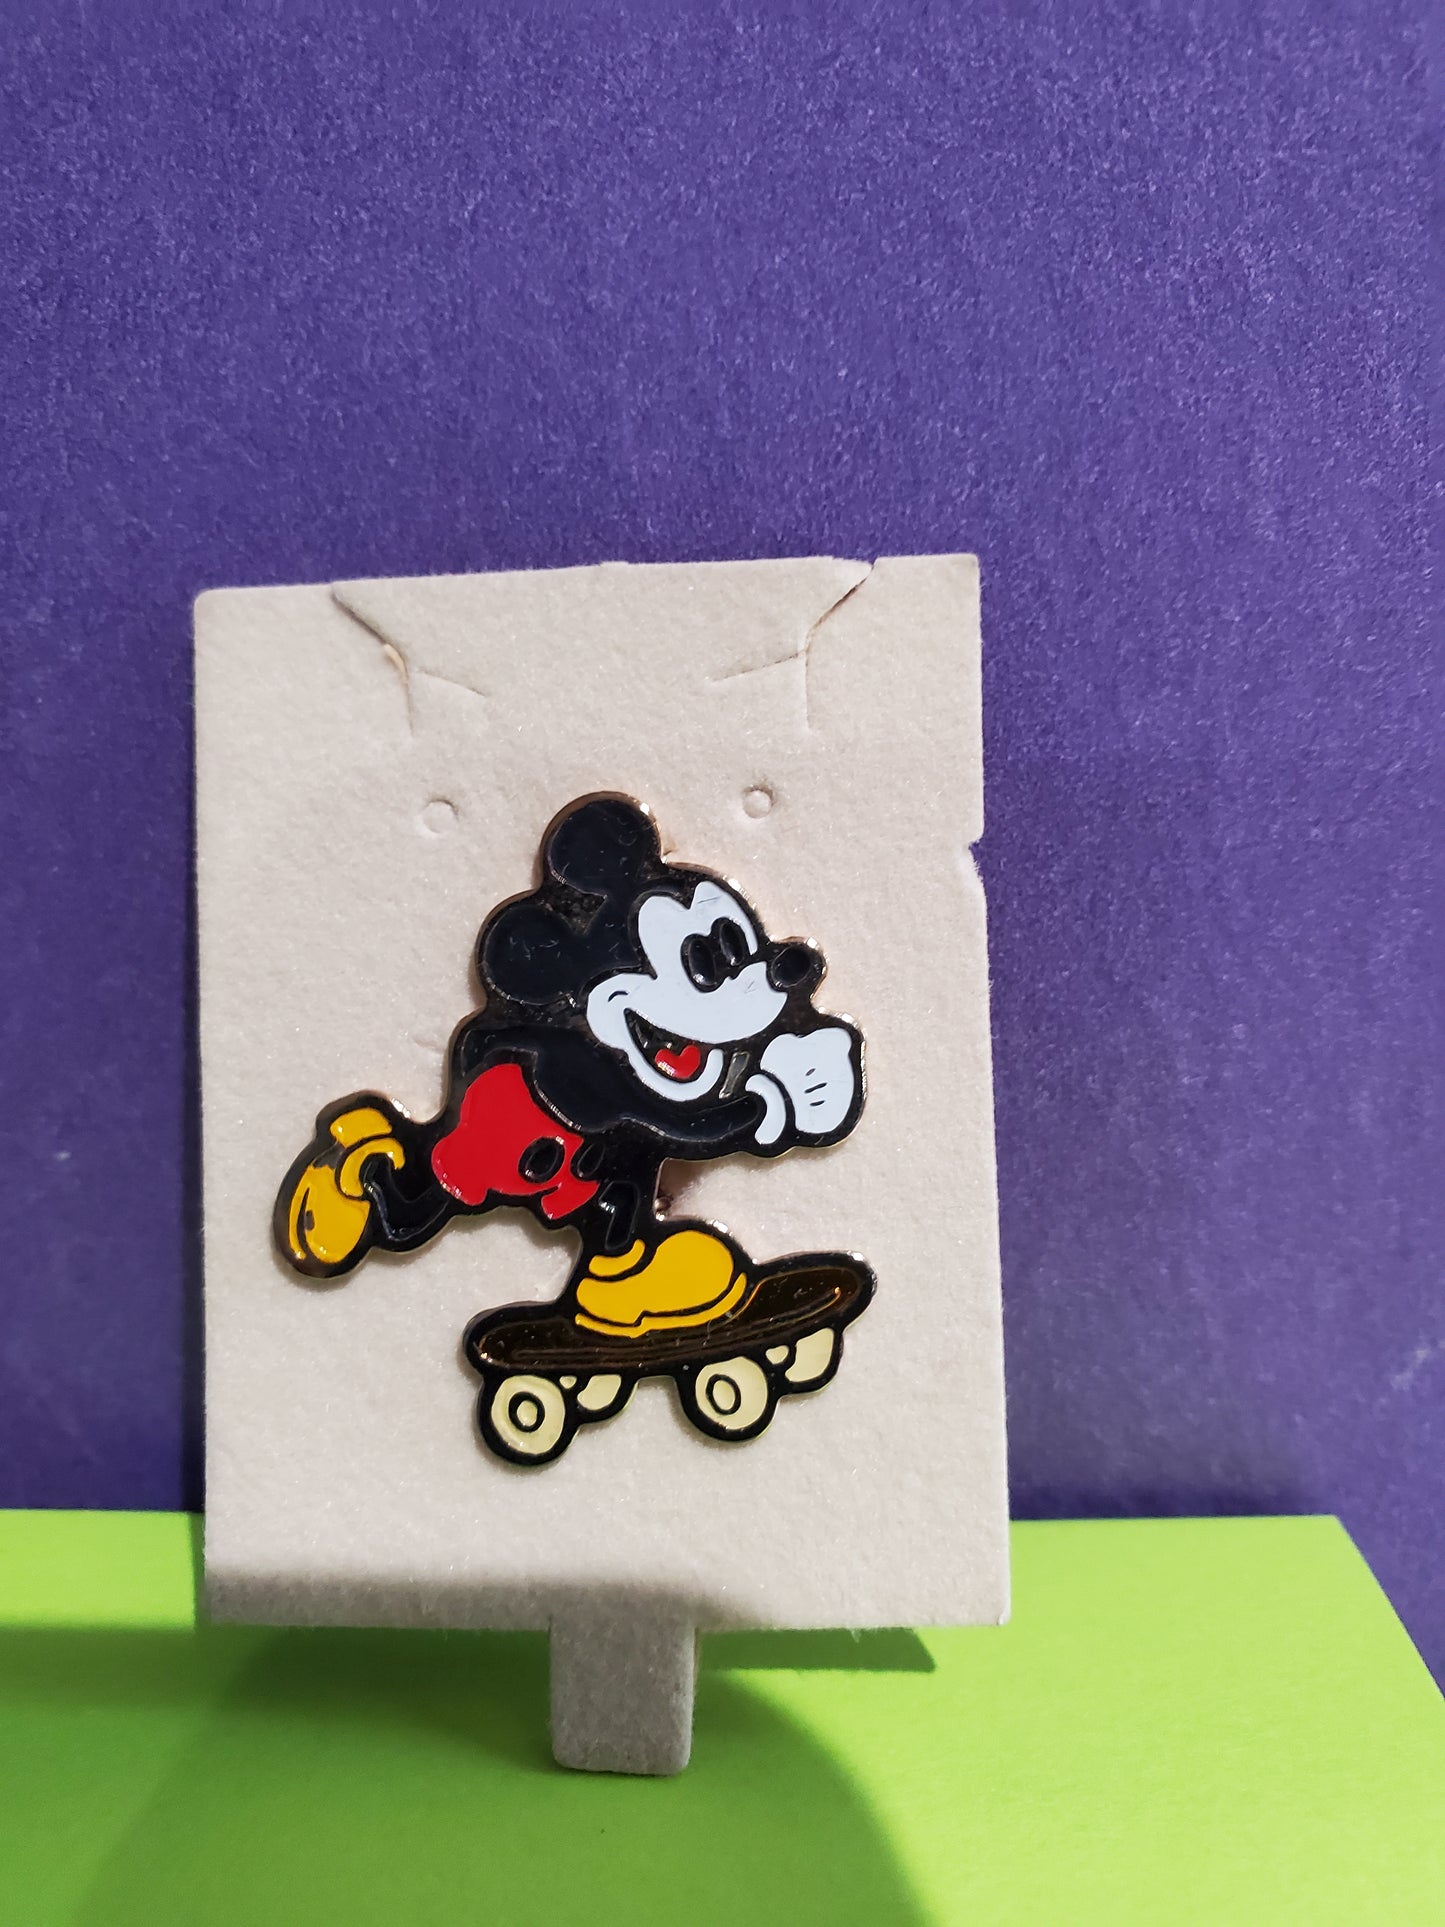 Mickey Mouse Jewelry - Enamel Pin - Mickey on Skateboard - Mint old store stock - 1980's